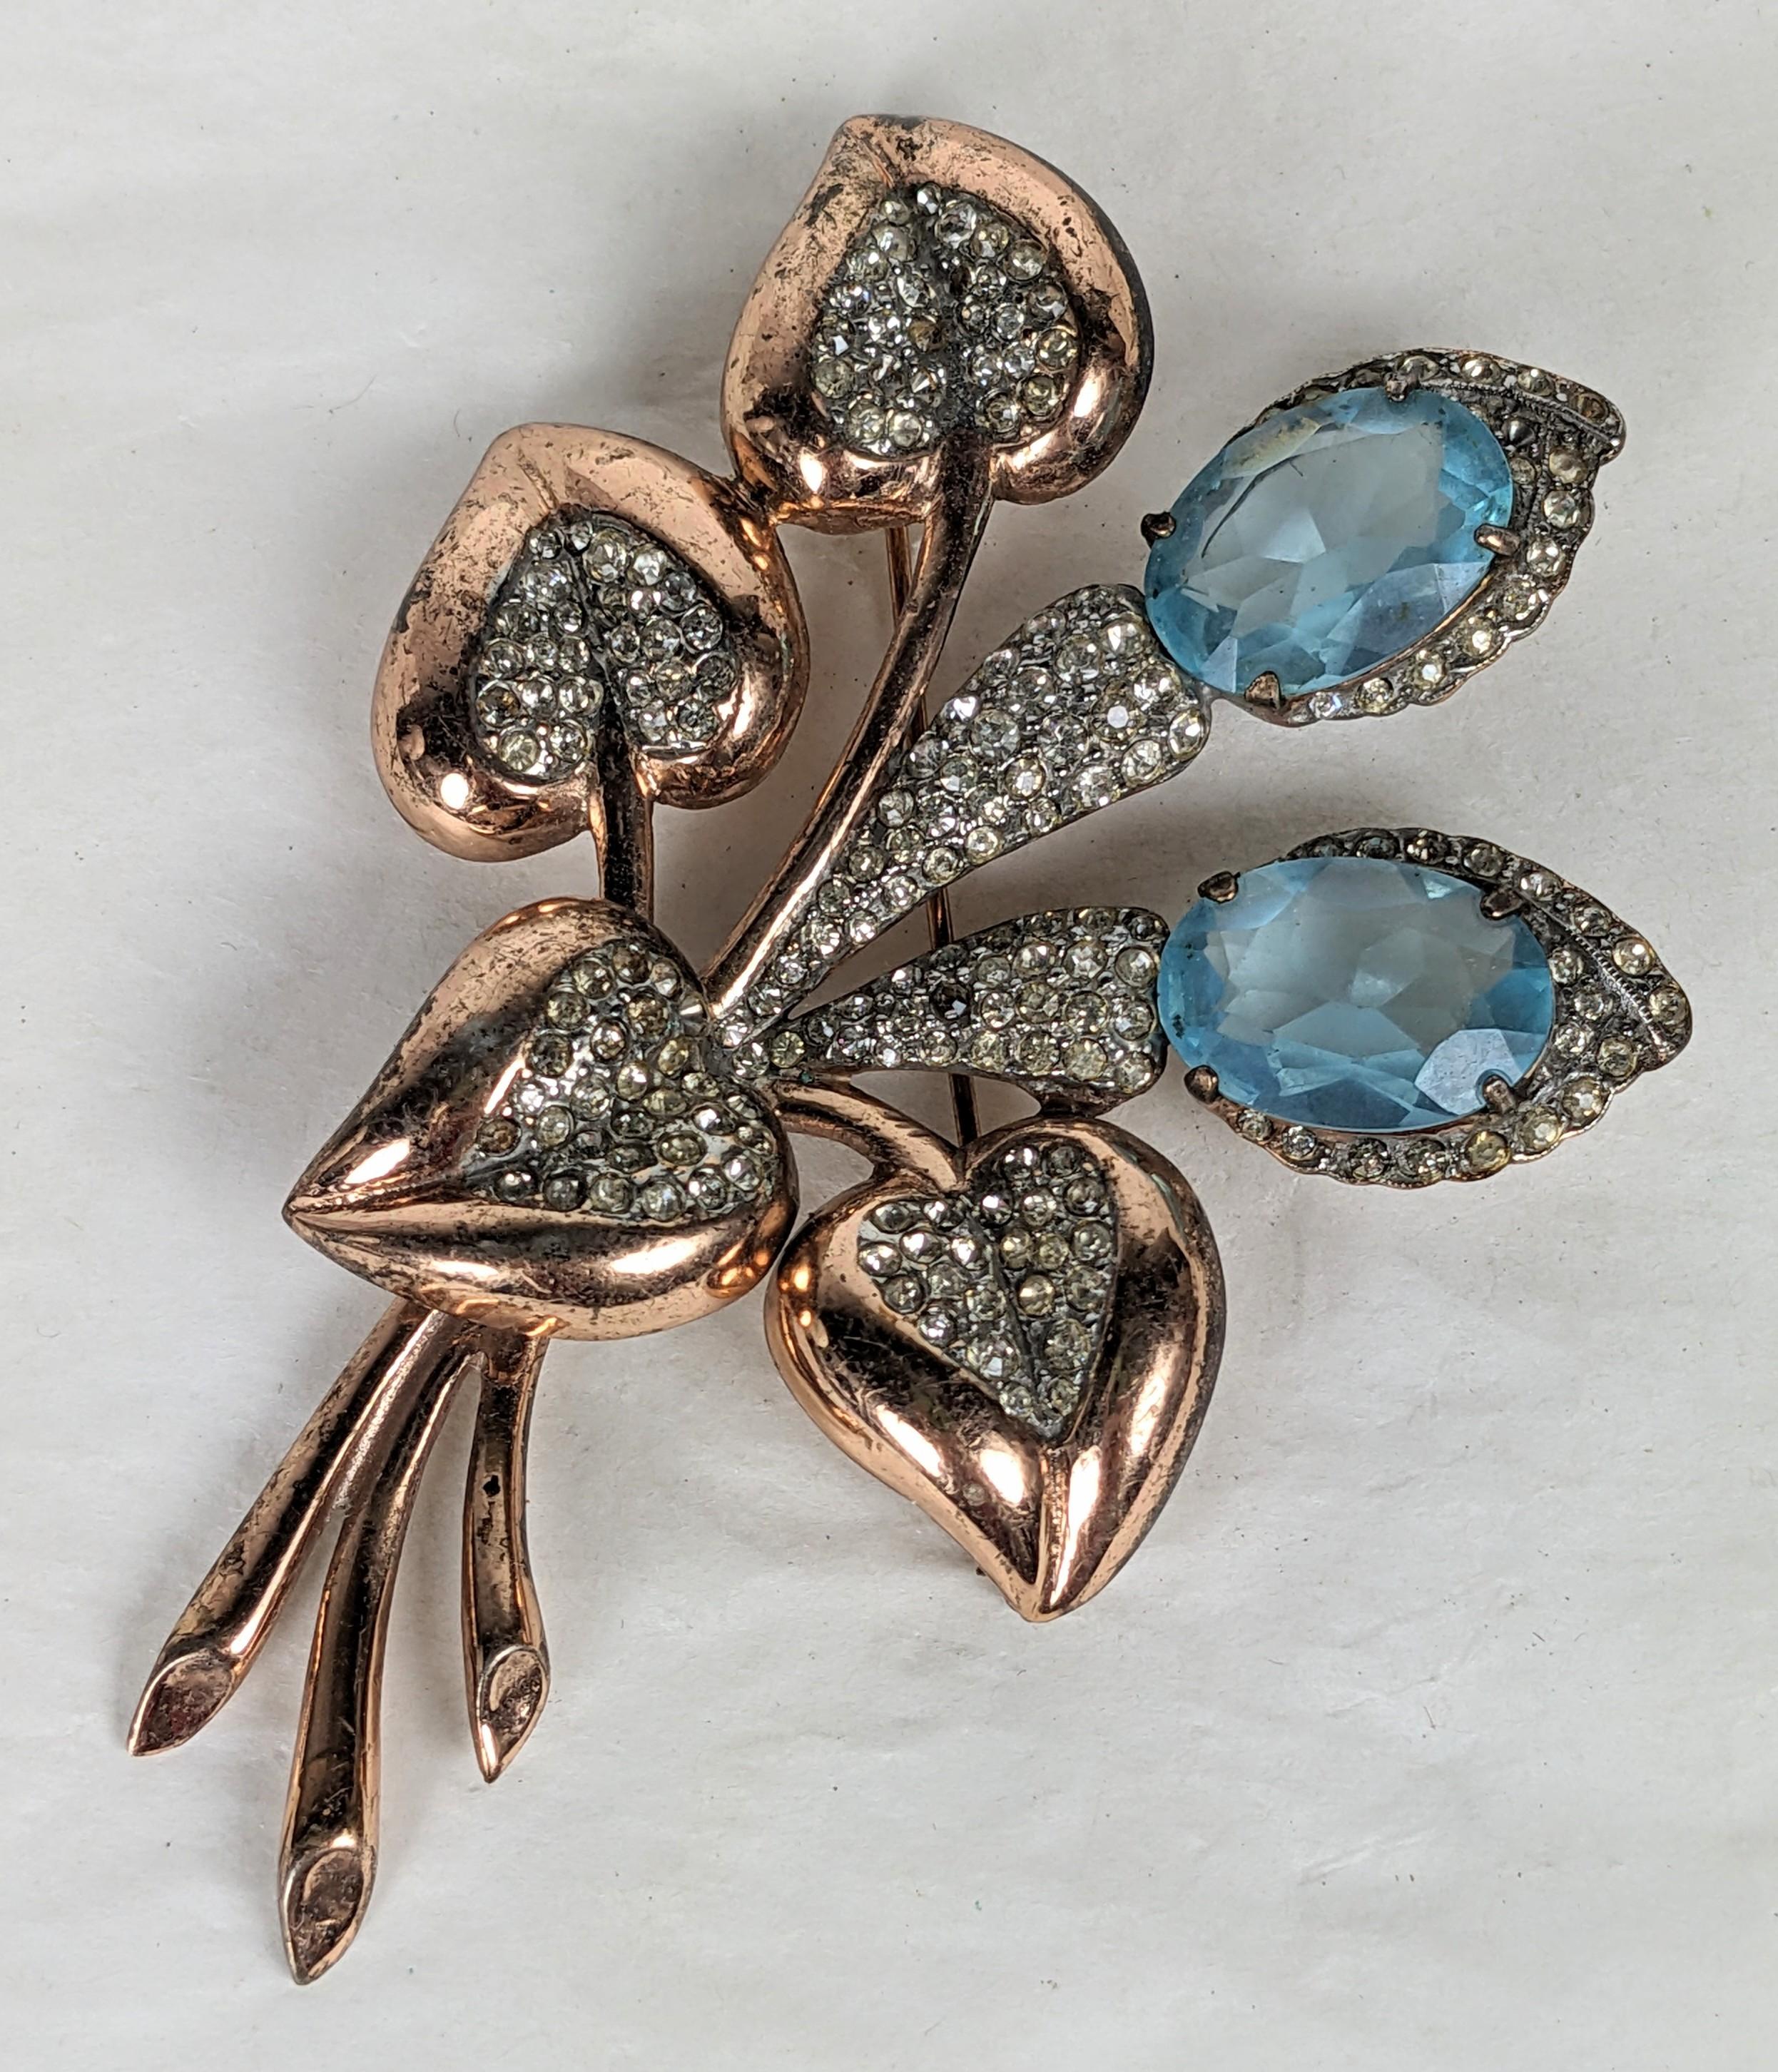 Striking Retro Sterling Vermeil Aquamarine Spray from the 1940's. Large scaled floral brooch in sterling with rose gold wash, pave accents and oval faux aquamarines. Unsigned. 3.75